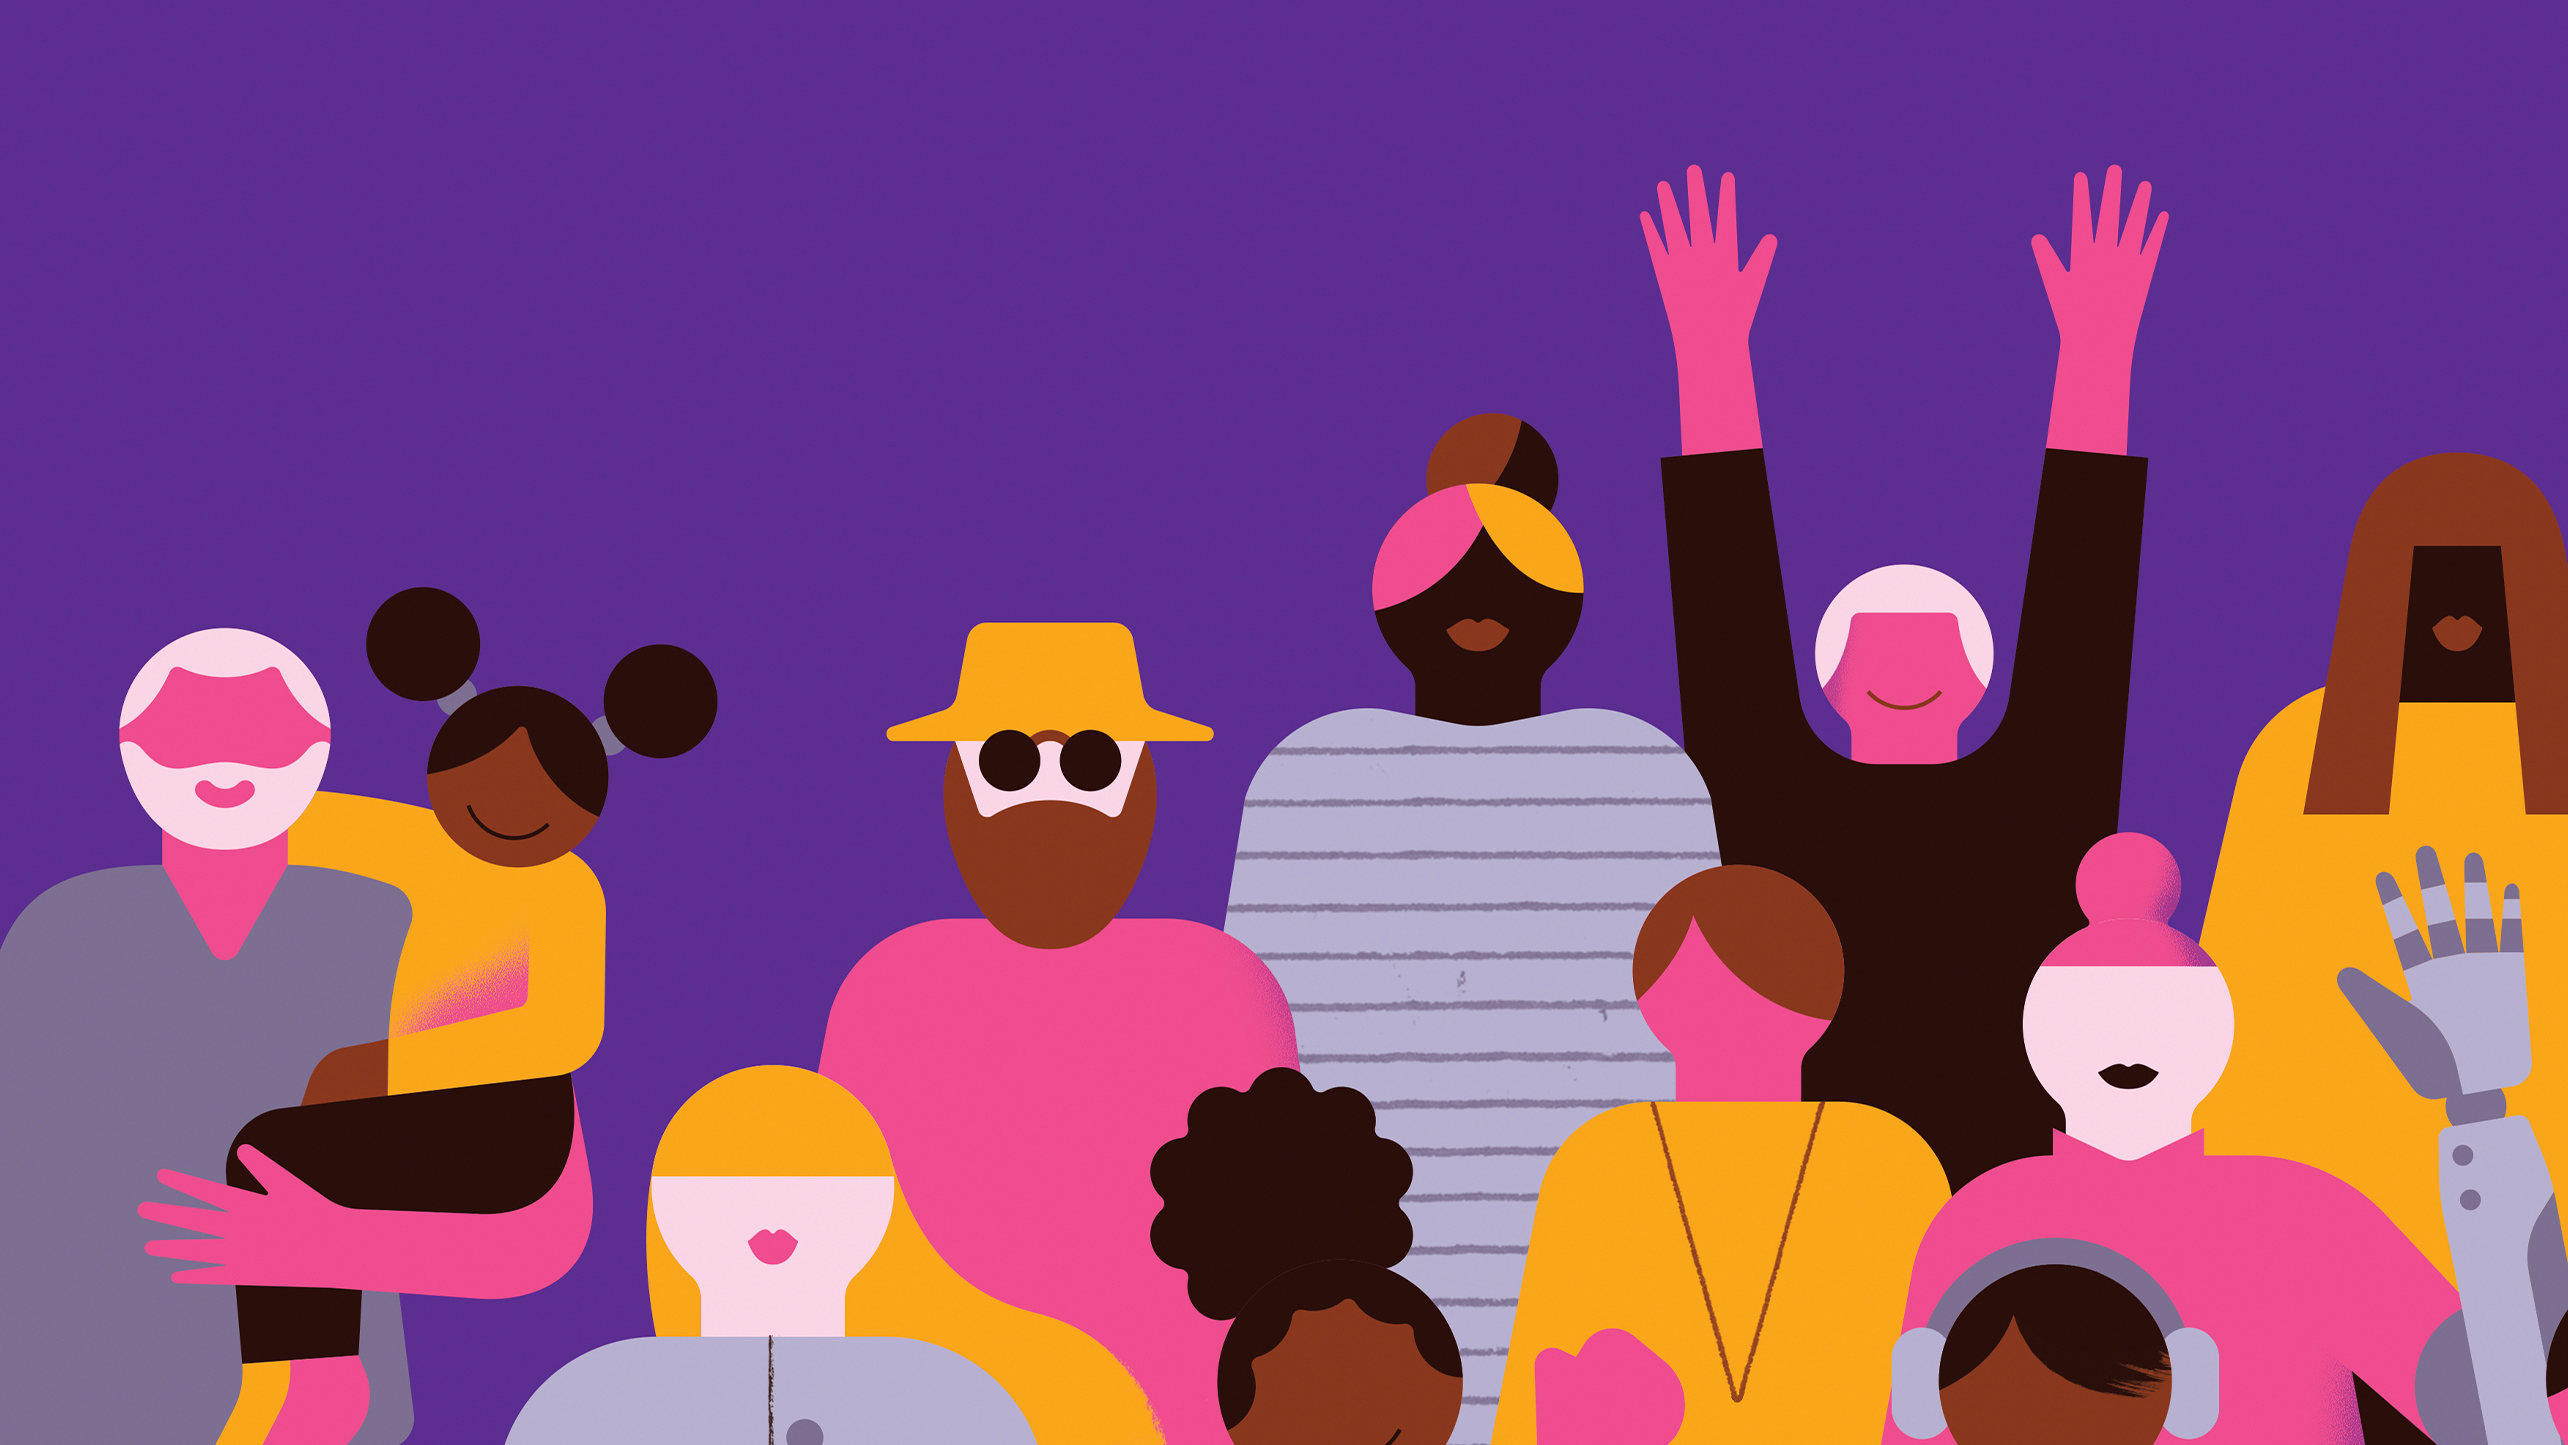 Illustration of group of diverse people on purple background